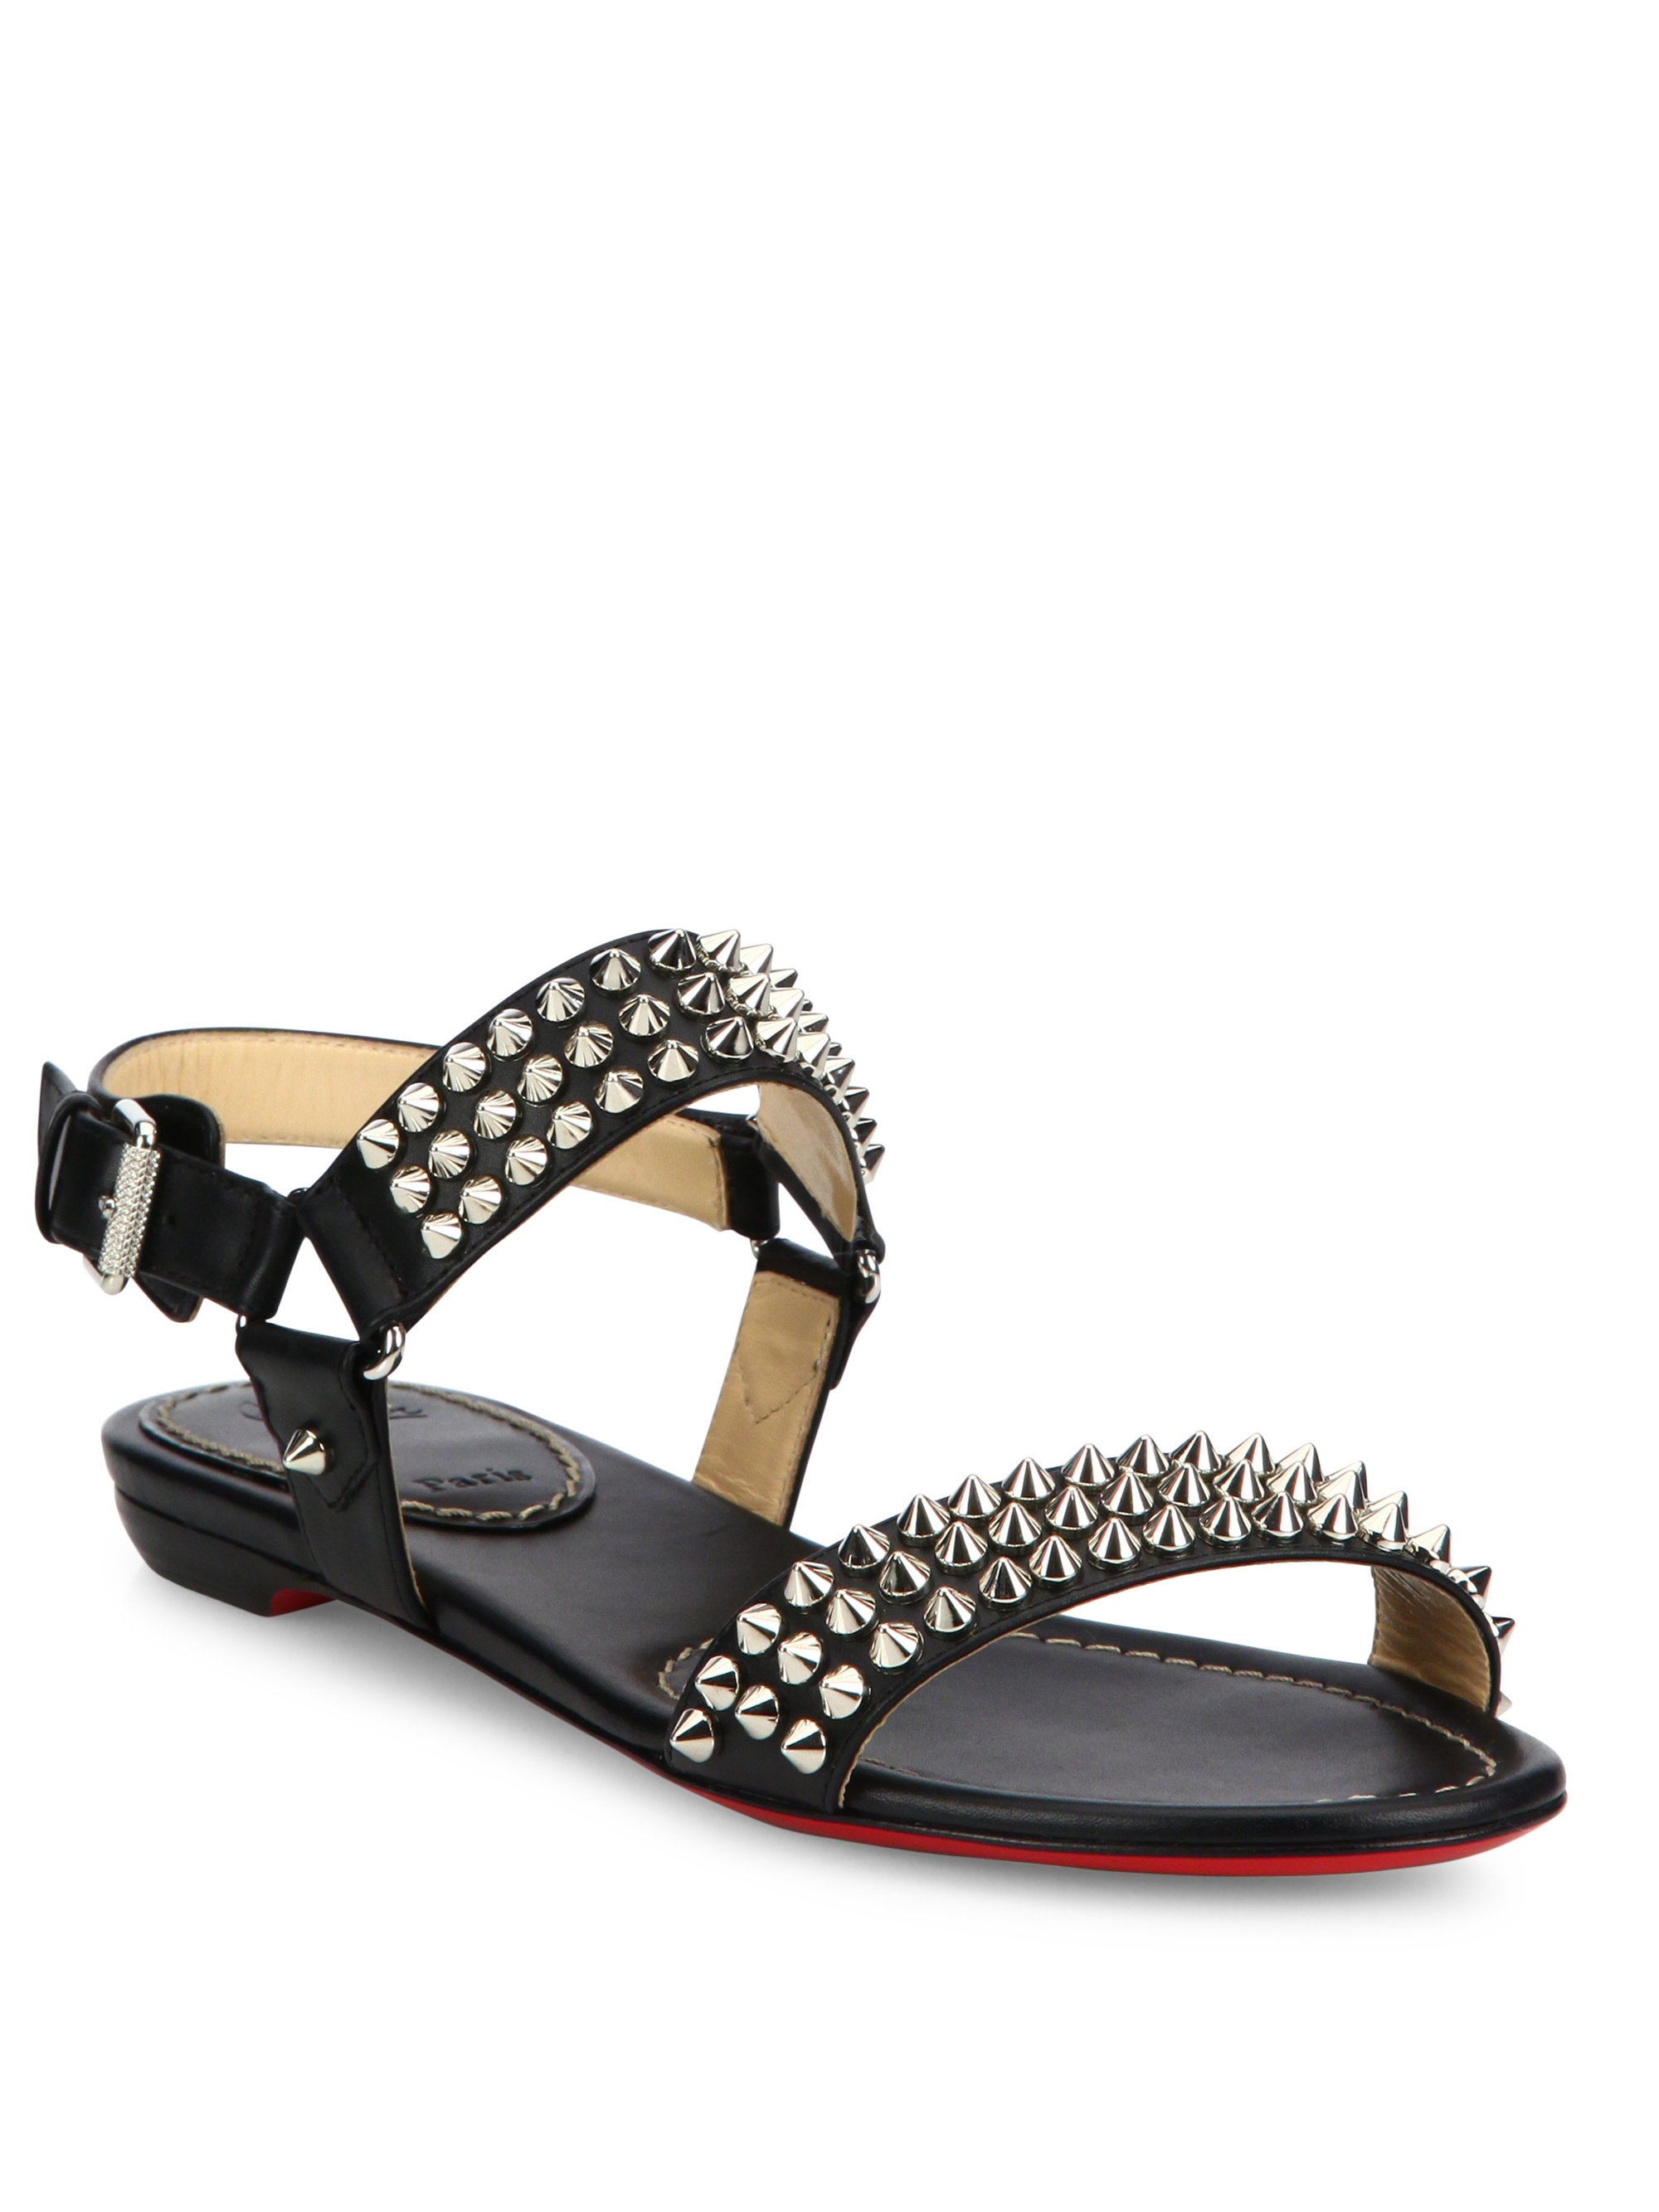 Christian louboutin Bikee Bike Spiked Leather Flat Sandals in Gold ...